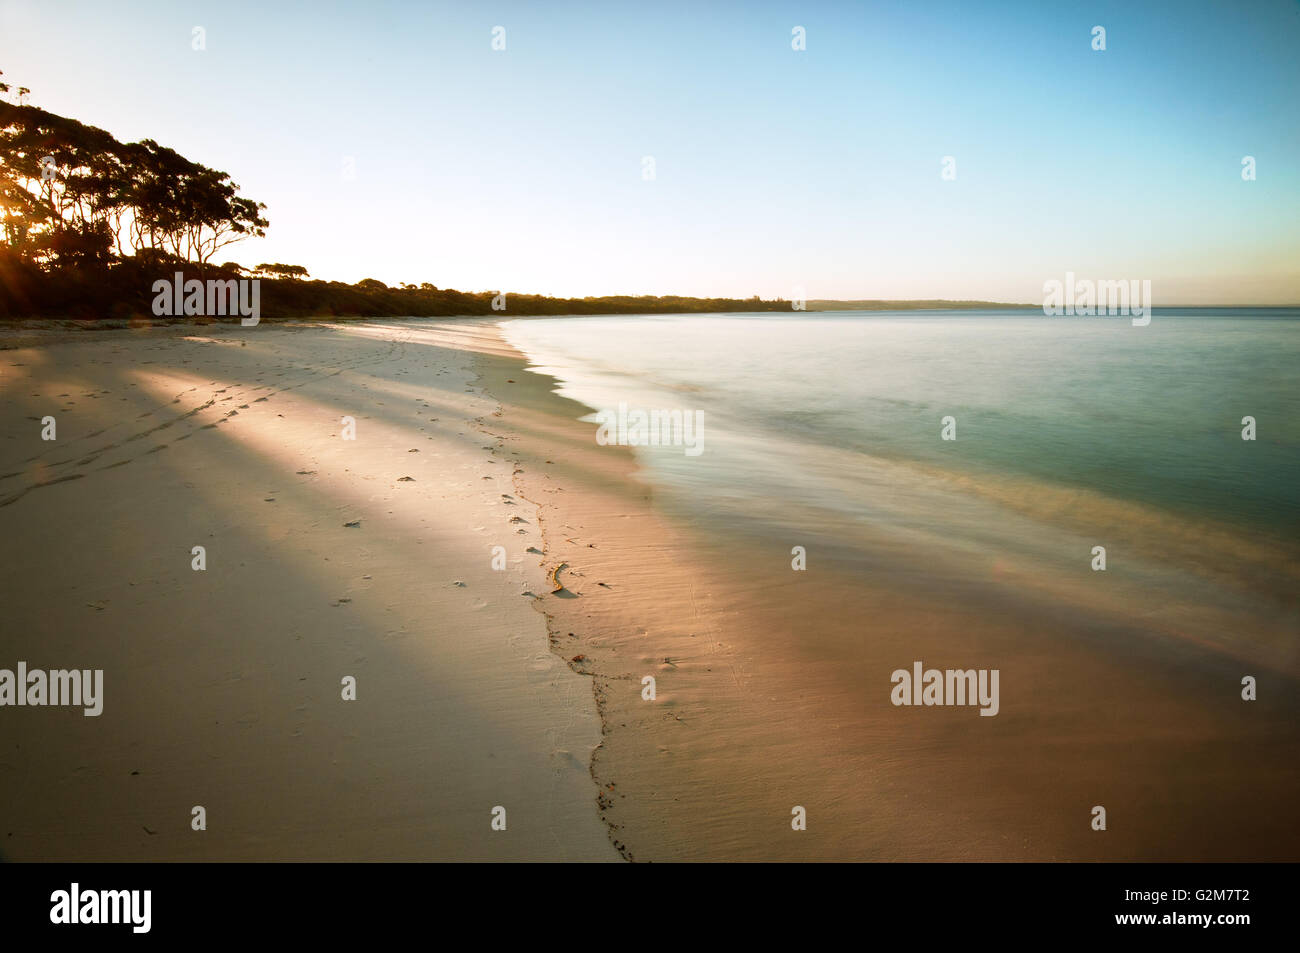 Letzte Ampel am Greenpatch Point Beach in Jervis Bay. Stockfoto